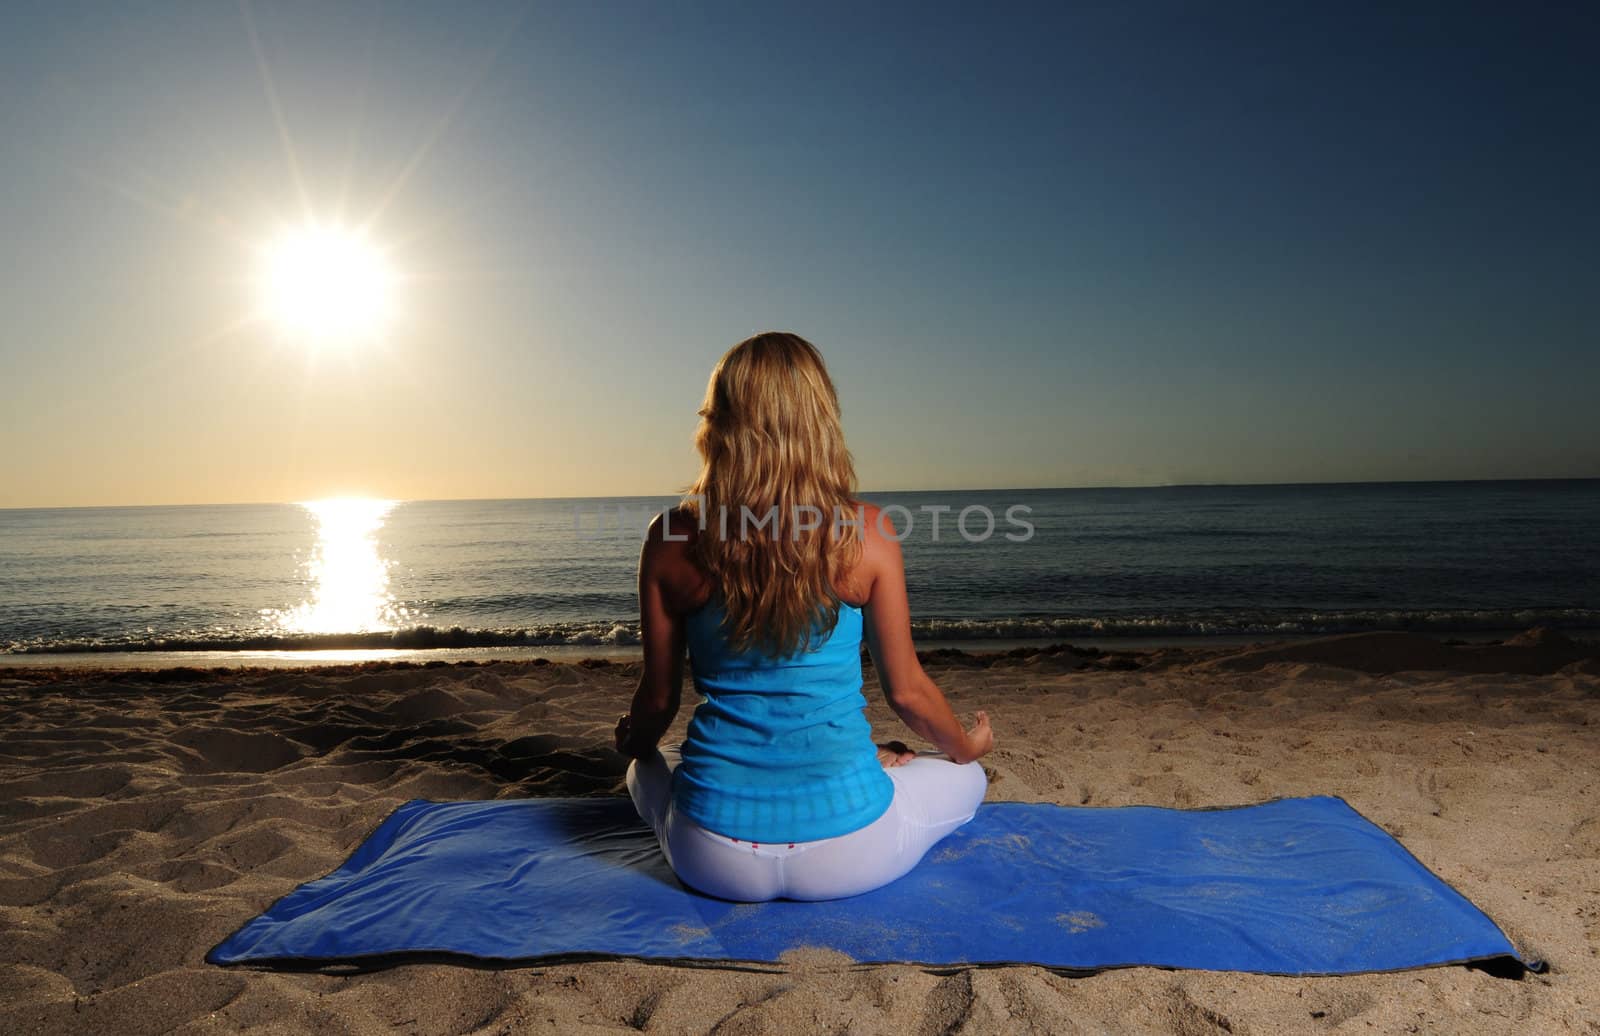 Meditating on beach with sunrise by ftlaudgirl